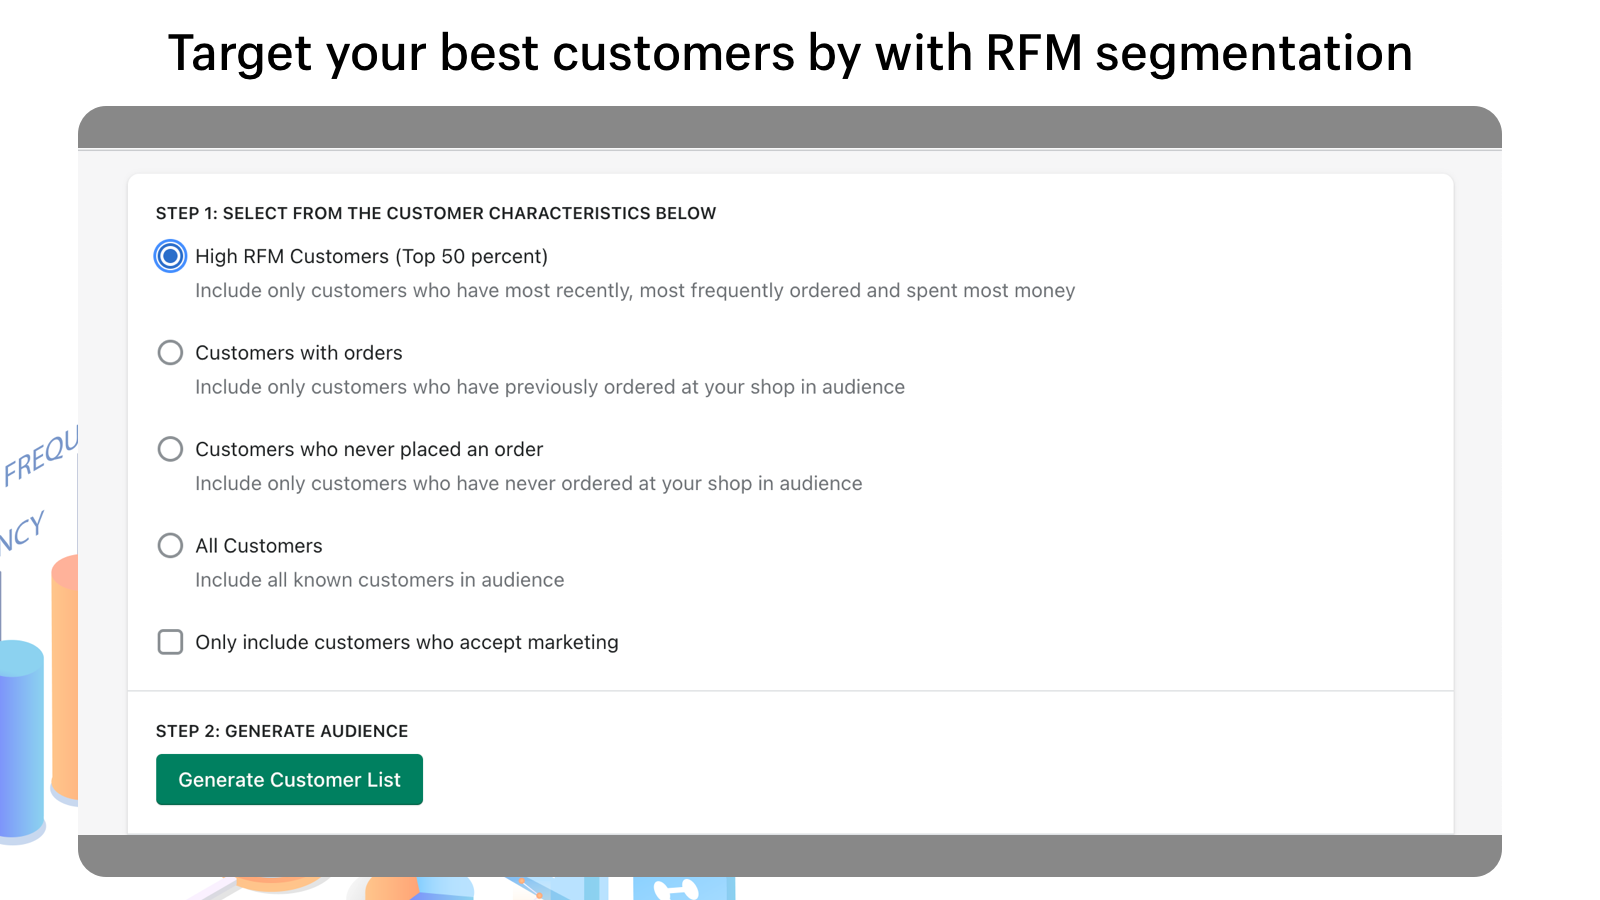 Target your best customers with RFM segmentation